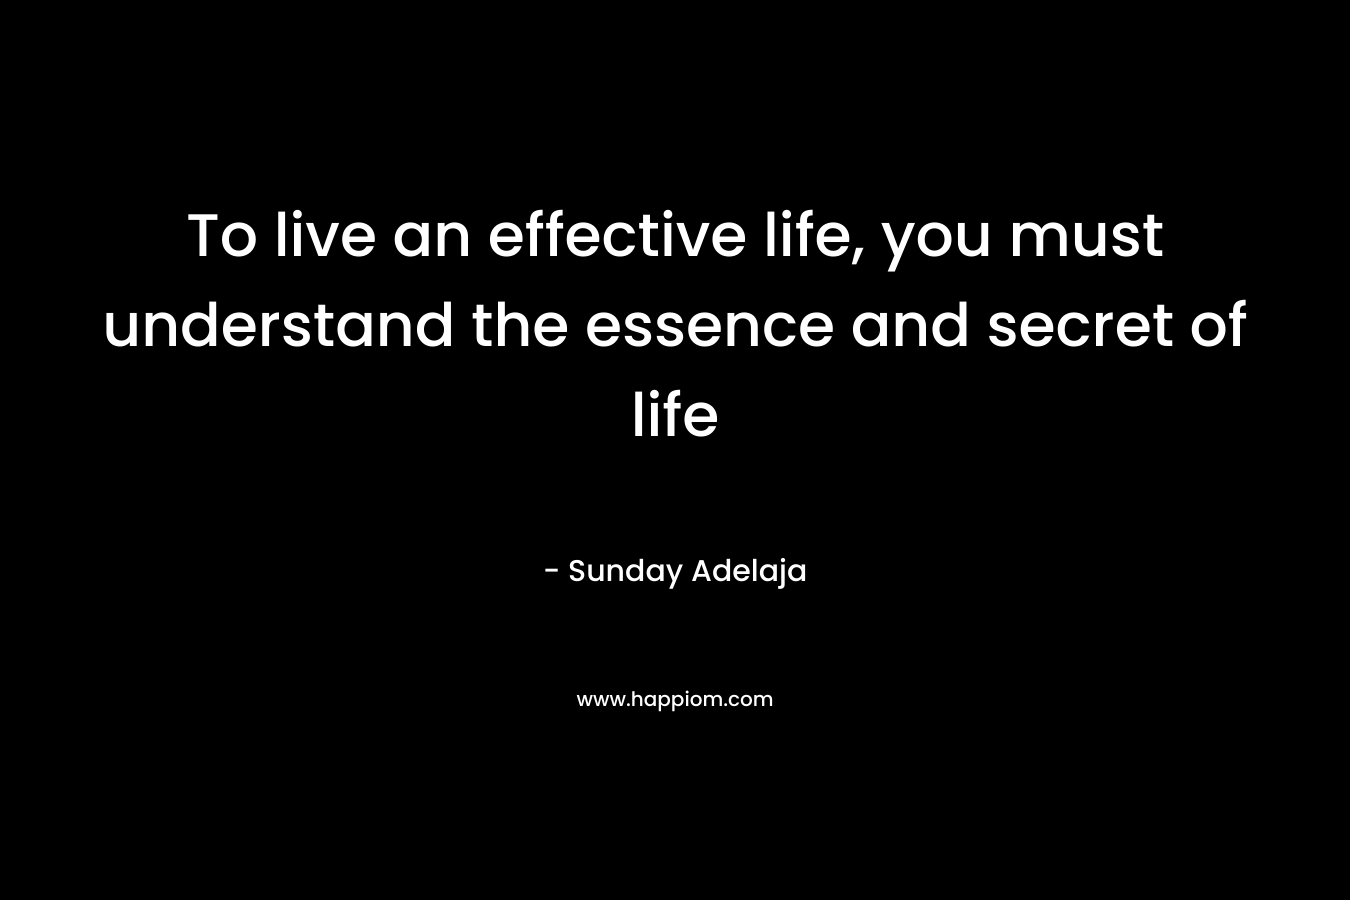 To live an effective life, you must understand the essence and secret of life